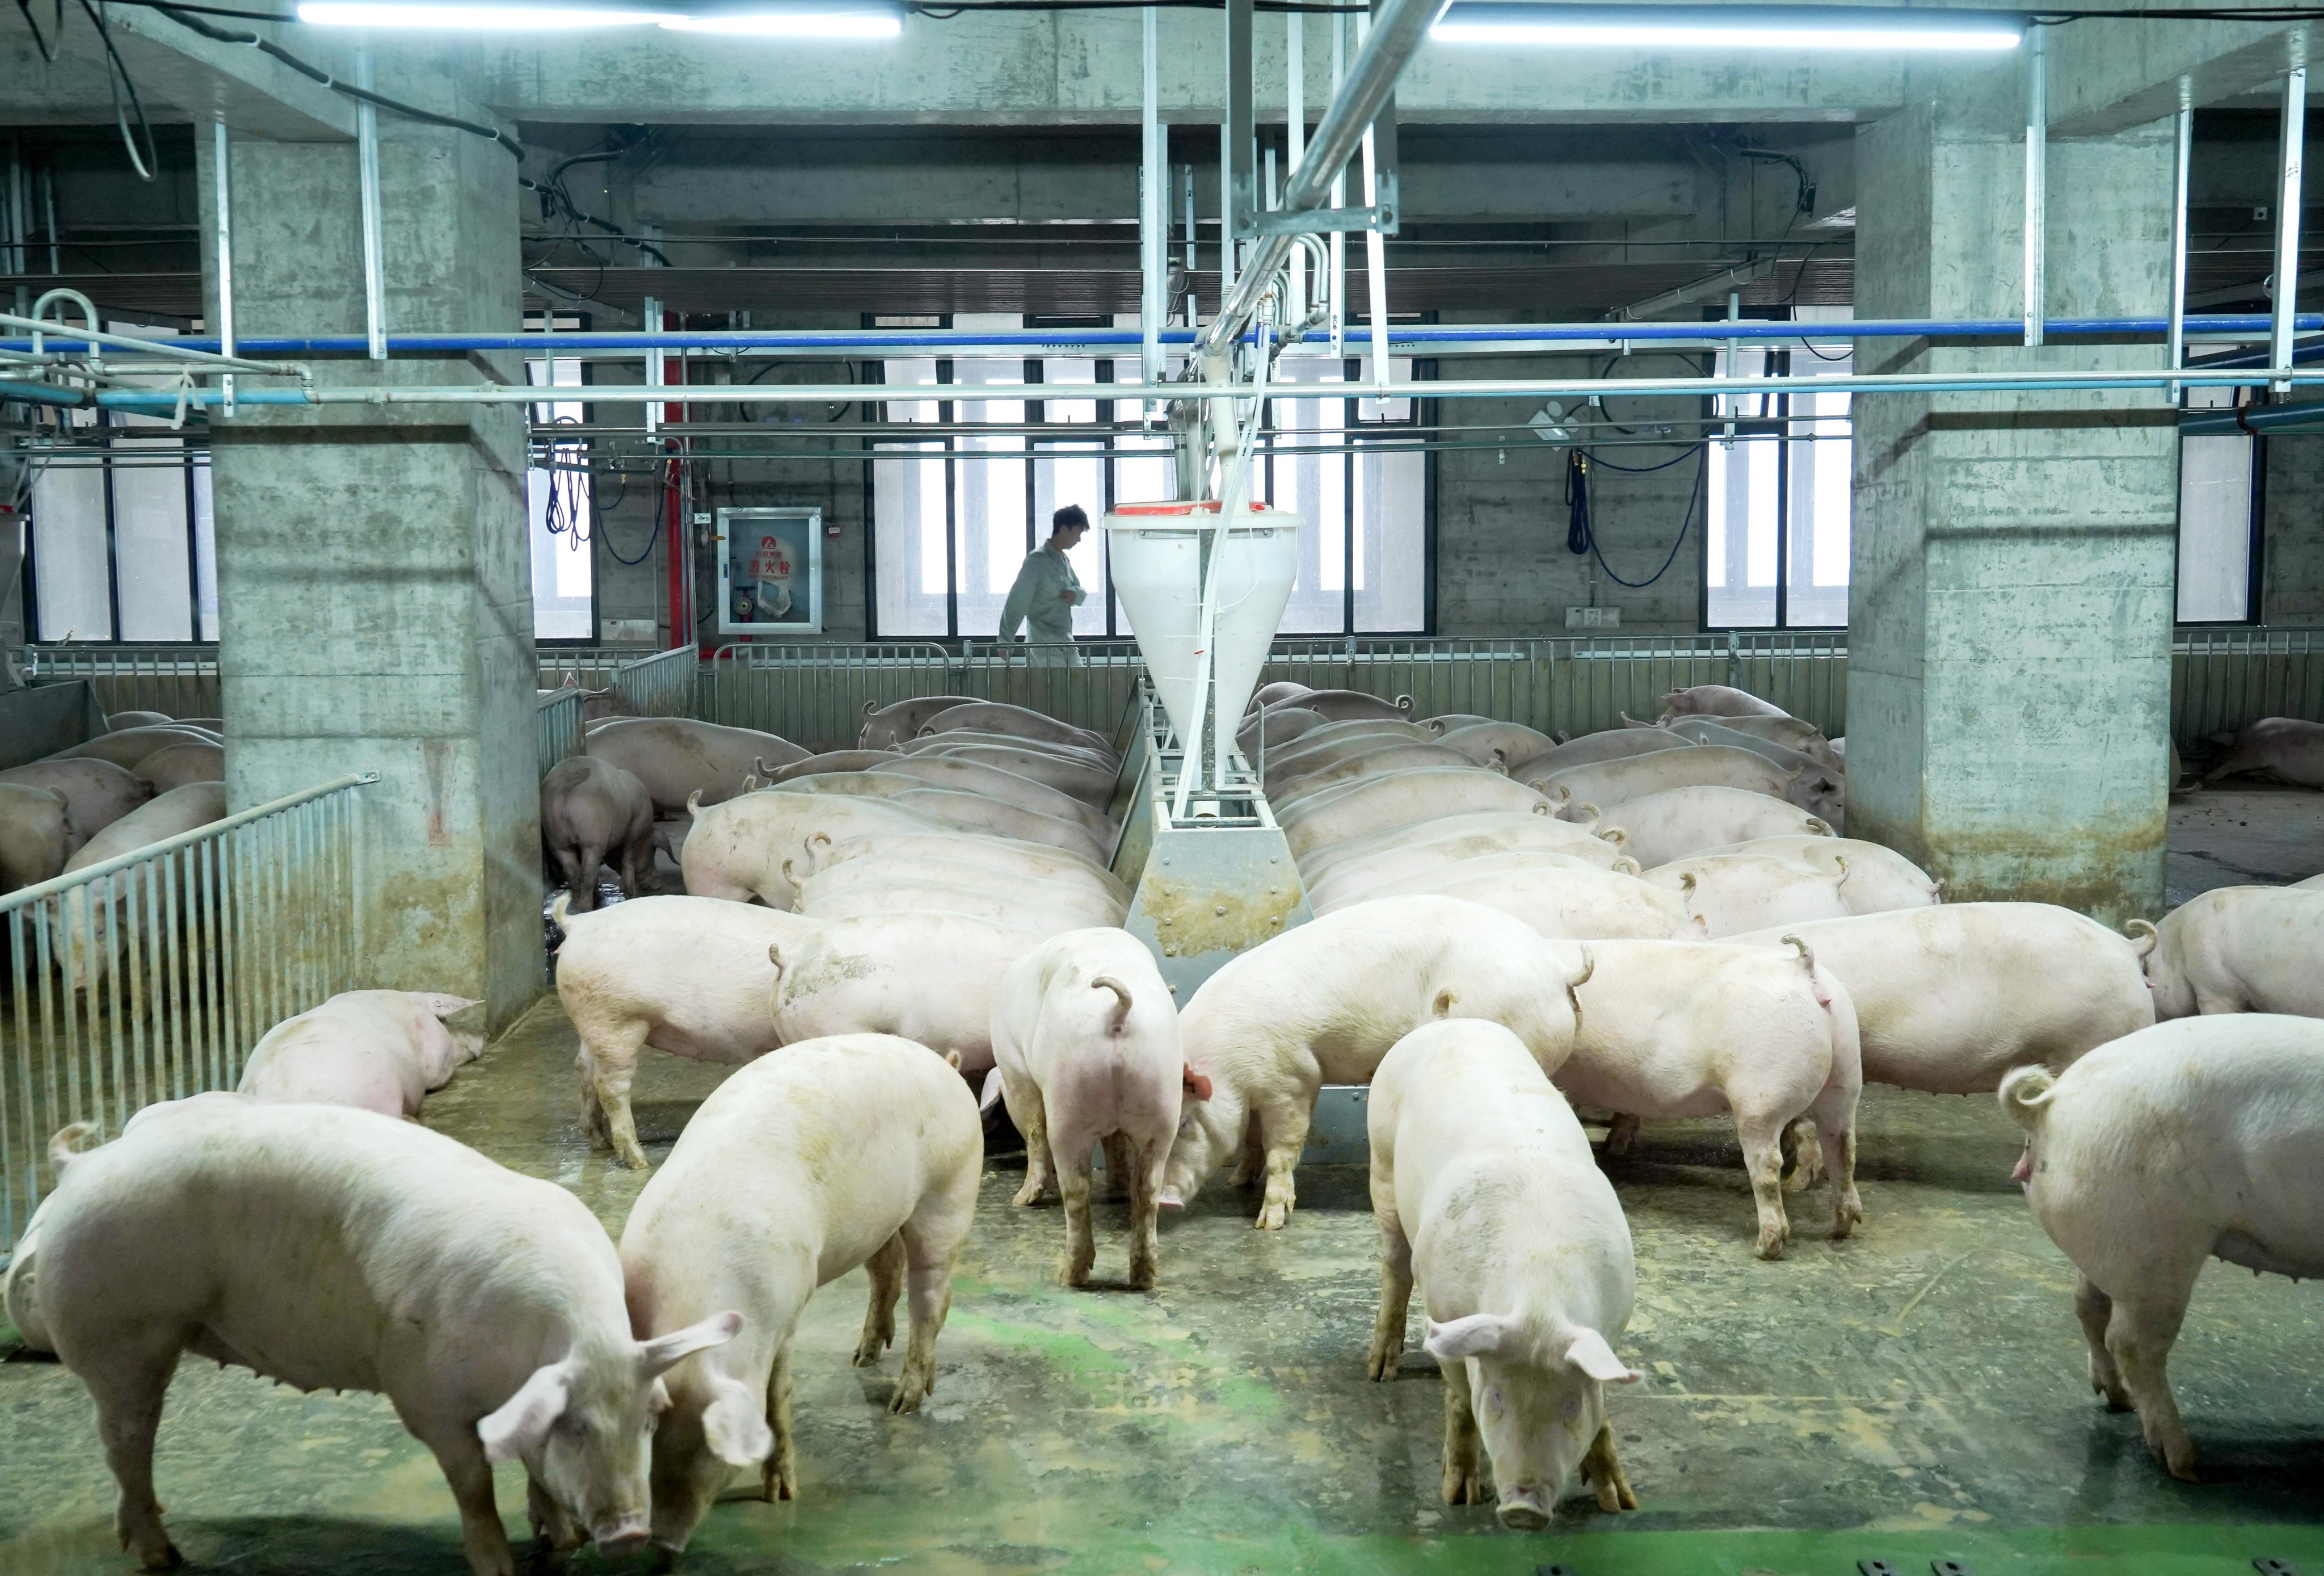 Two high-rise buildings in Ezhou, Hubei province, will be able to produce 1.2 million fully grown pigs a year when fully operational. Photo: Xinhua